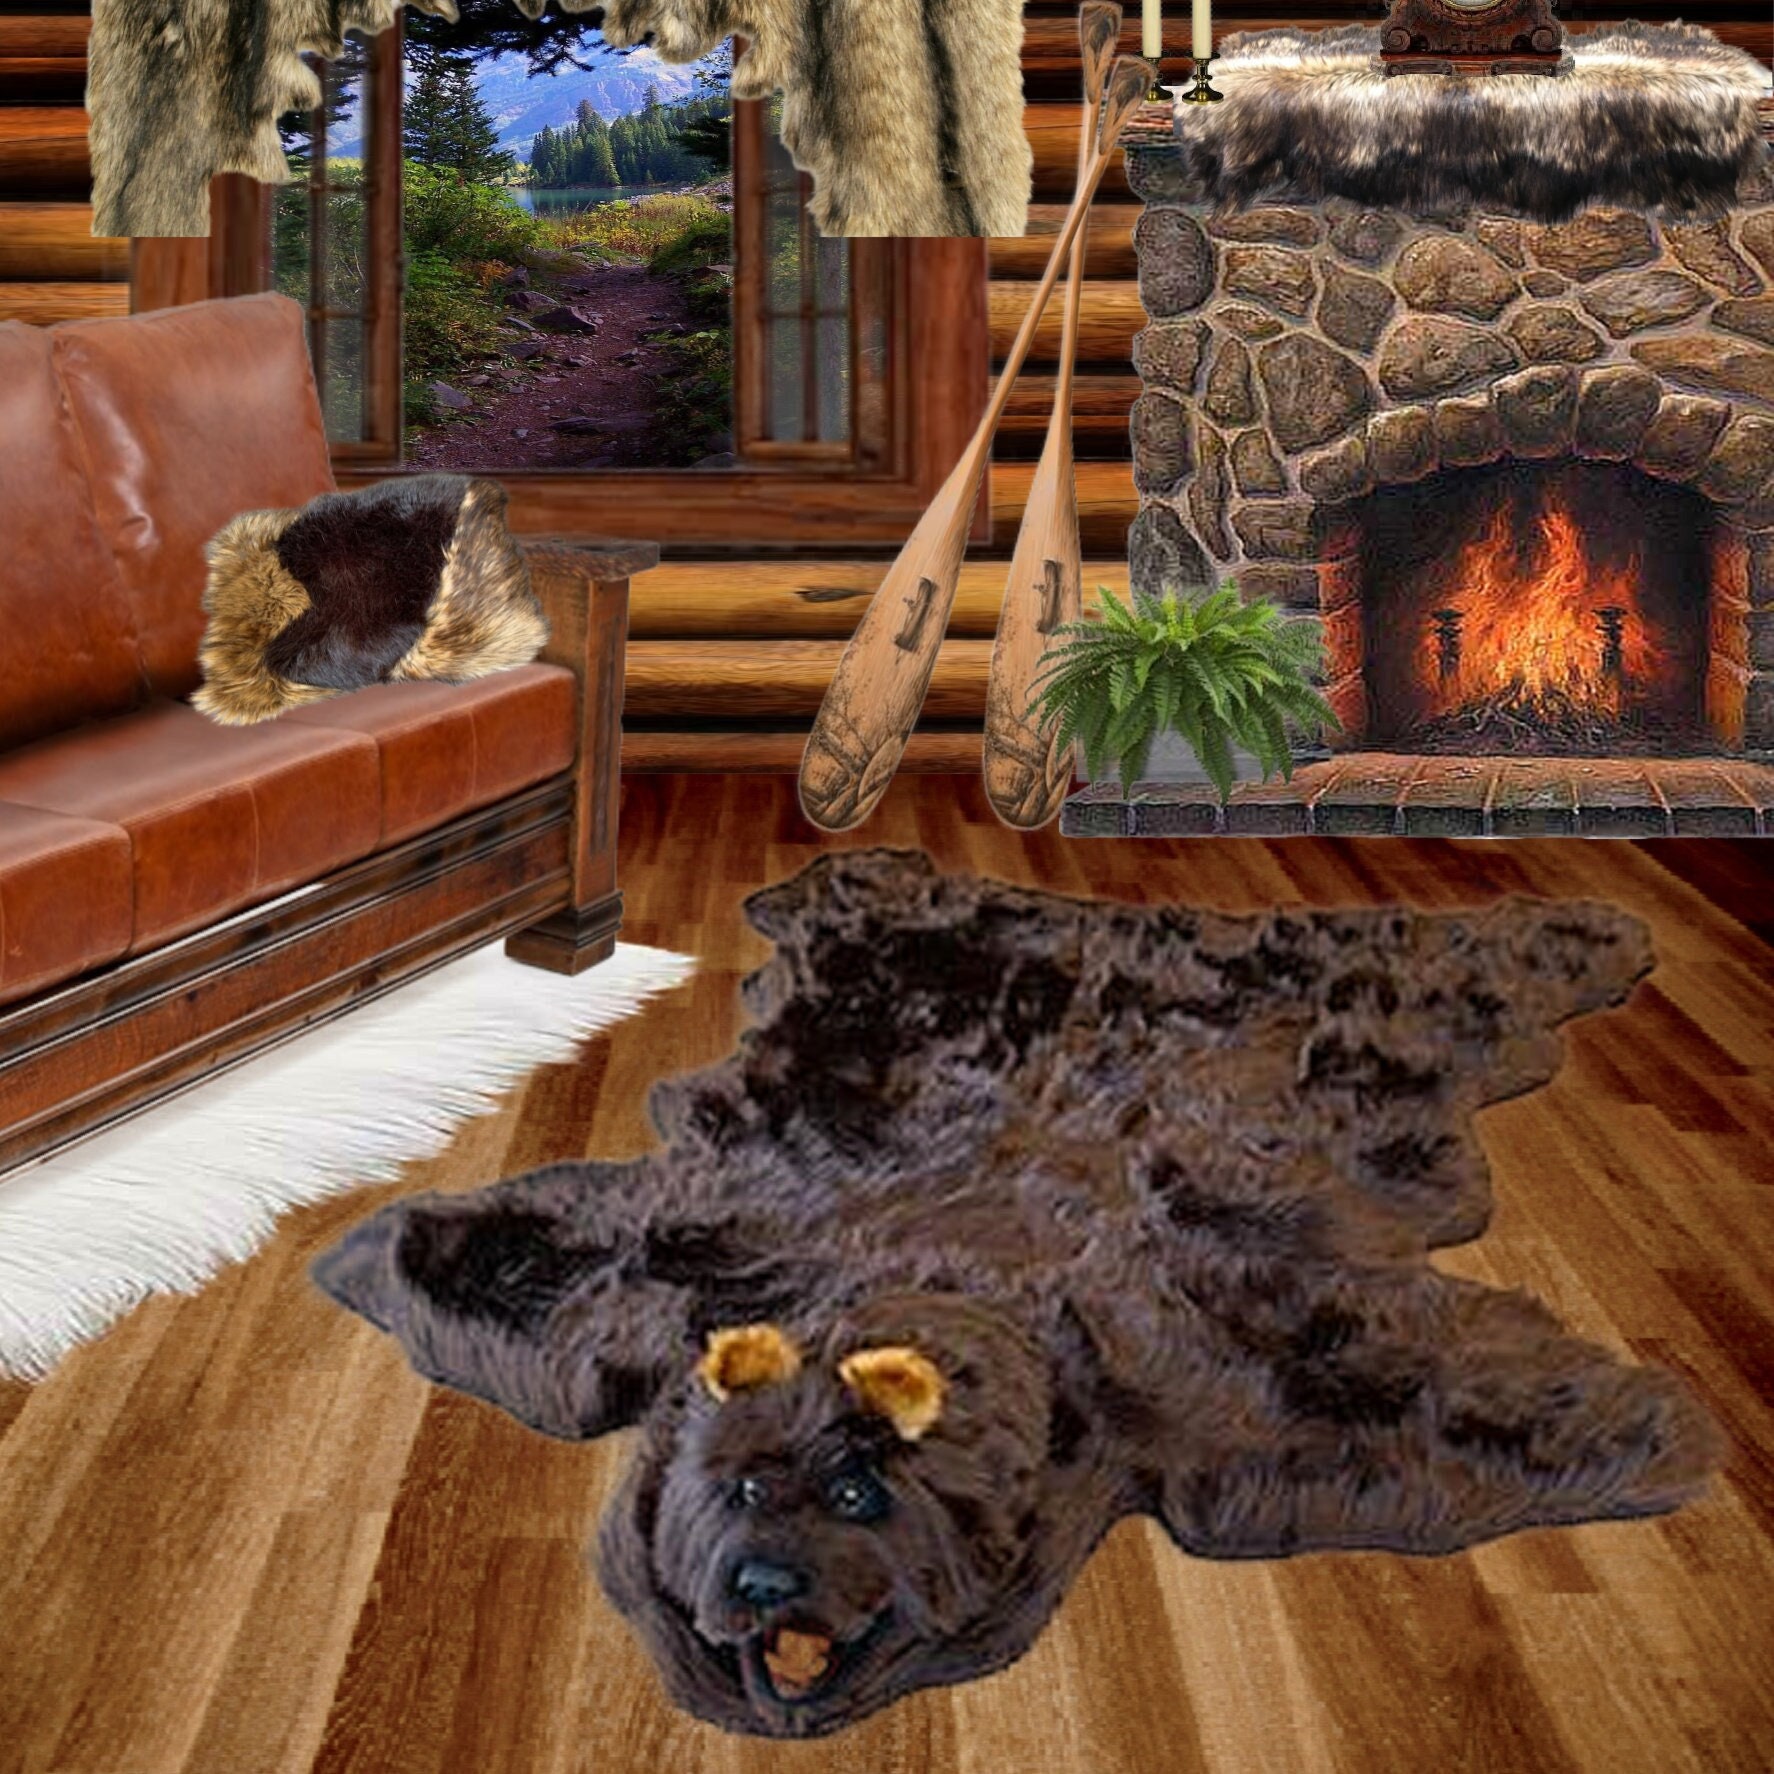 angus whelan recommends romantic bear skin rug in front of fireplace pic